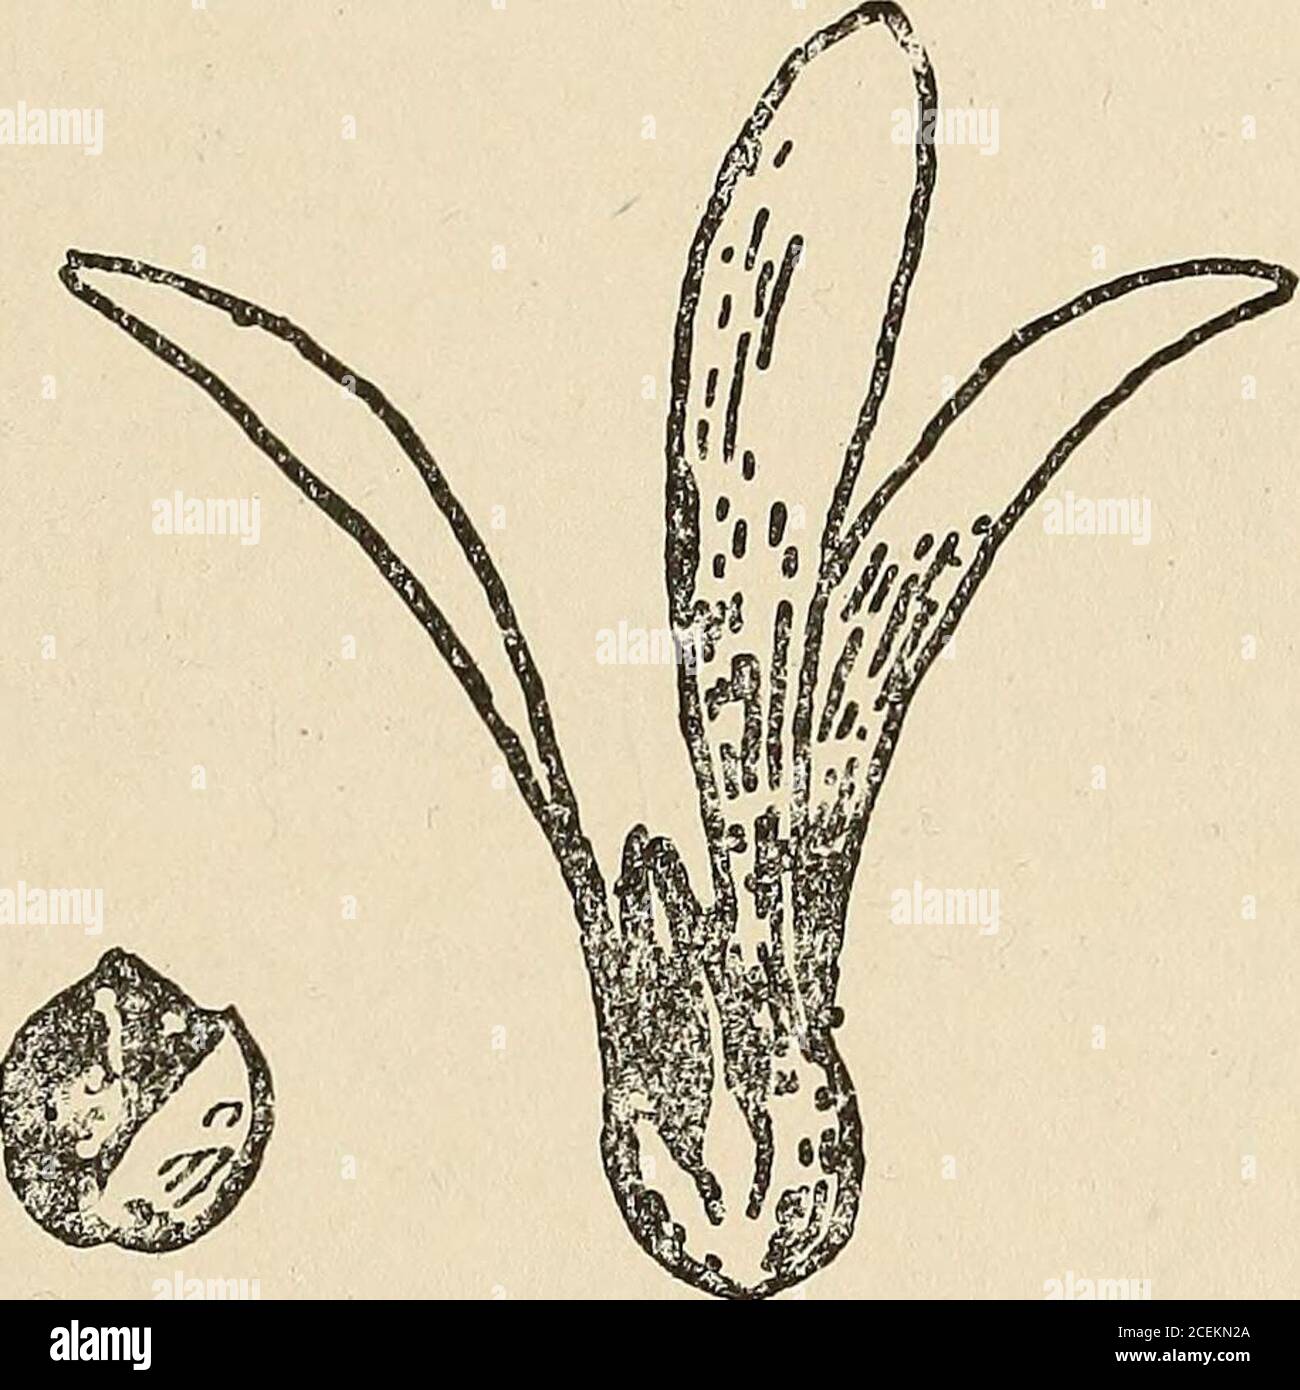 . Journal of the Straits Branch of the Royal Asiatic Society. inensis. Jour. Straits Branch GOEDONIA. 159 Outstanding features in the genus are:— the septifragal capsule of G. pubescens. i. the wingless seeds of G. pubescens. ii. the deep crimson colour of the flowers of G. speciosa. v. the union of the filaments into five groups in G. Lasianthusand in G. speciosa; Ilaemocharis vulcanica is said some-times to exhibit this. v. the reduction of the number of the carpels sometimes in G.axillaris and in G. Balansae: and also in G. obtusa. vi. the distinctness of the veins in the two American speci Stock Photo